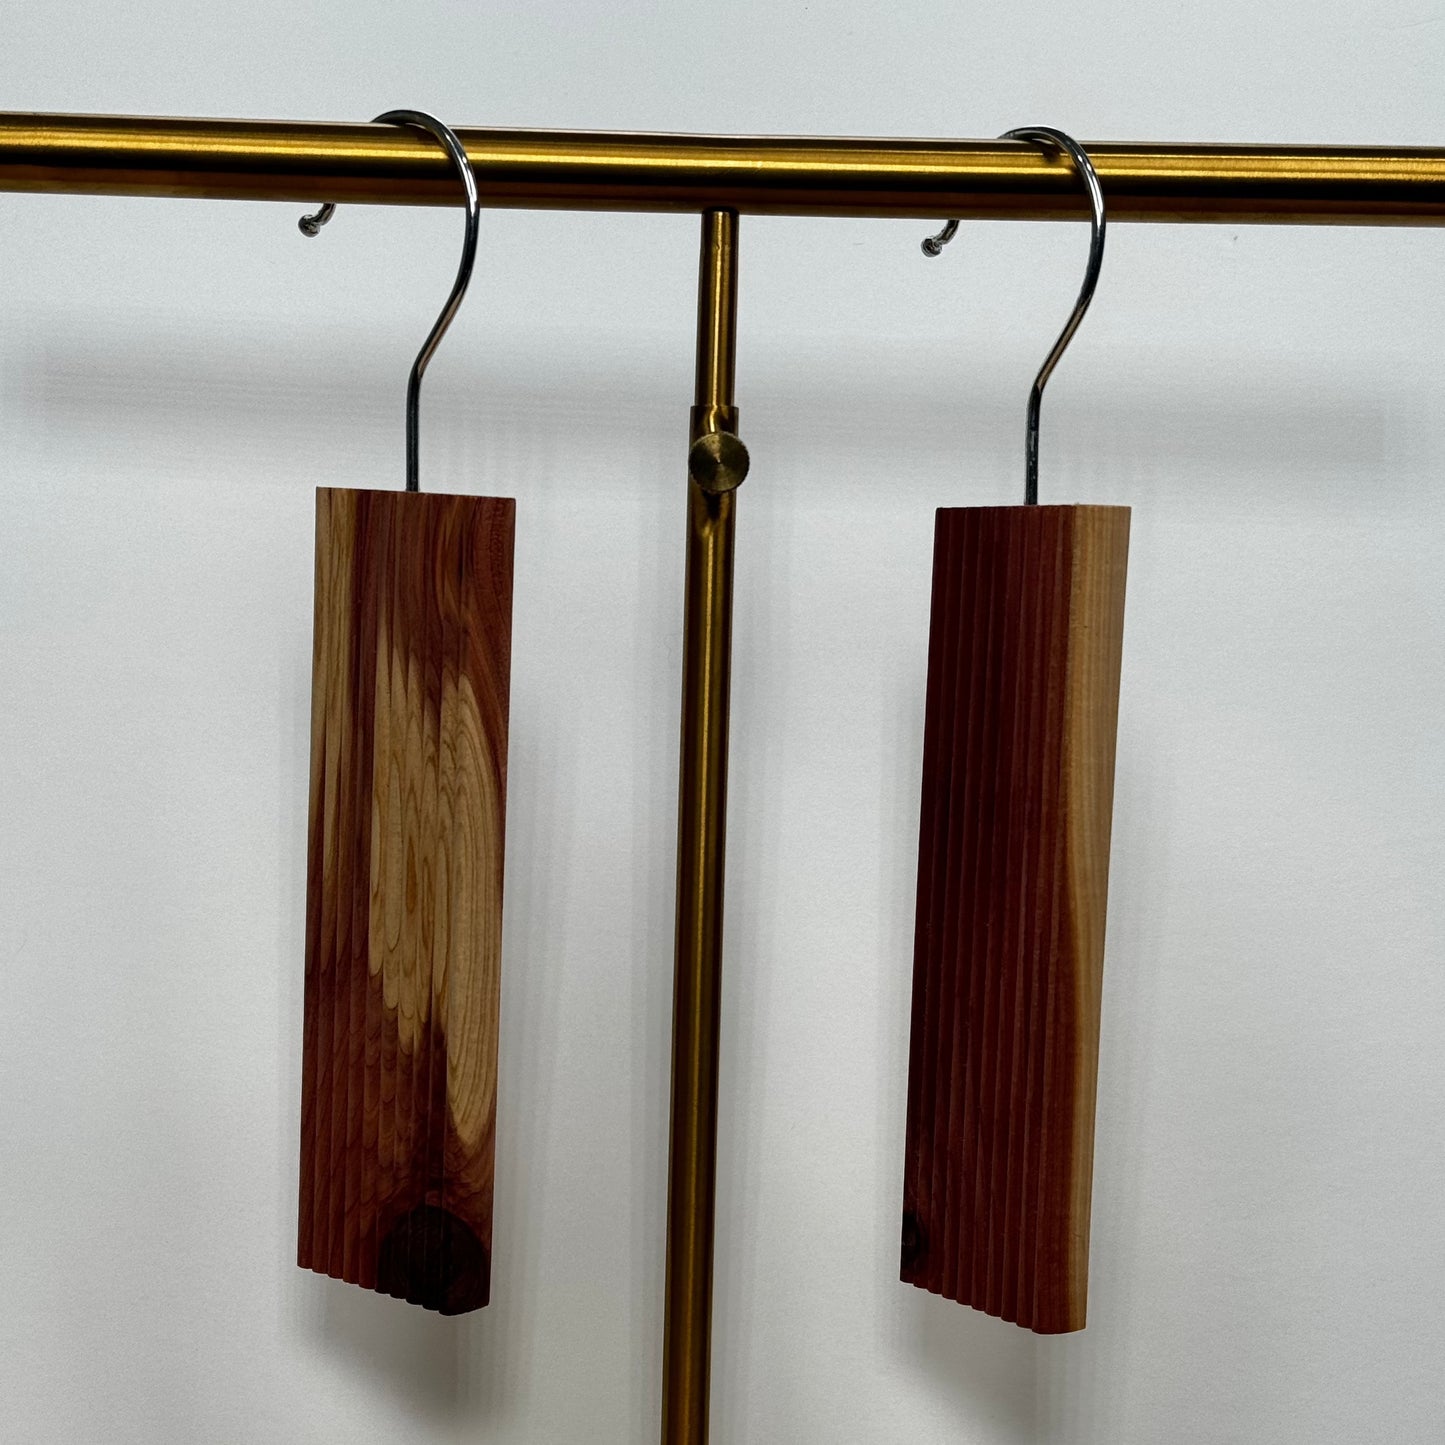 Two Scented Cedar Wood Hangups with Hook for Closets, made of moth-repellent scented cedar wood, on a metal clothing rail against a white background.